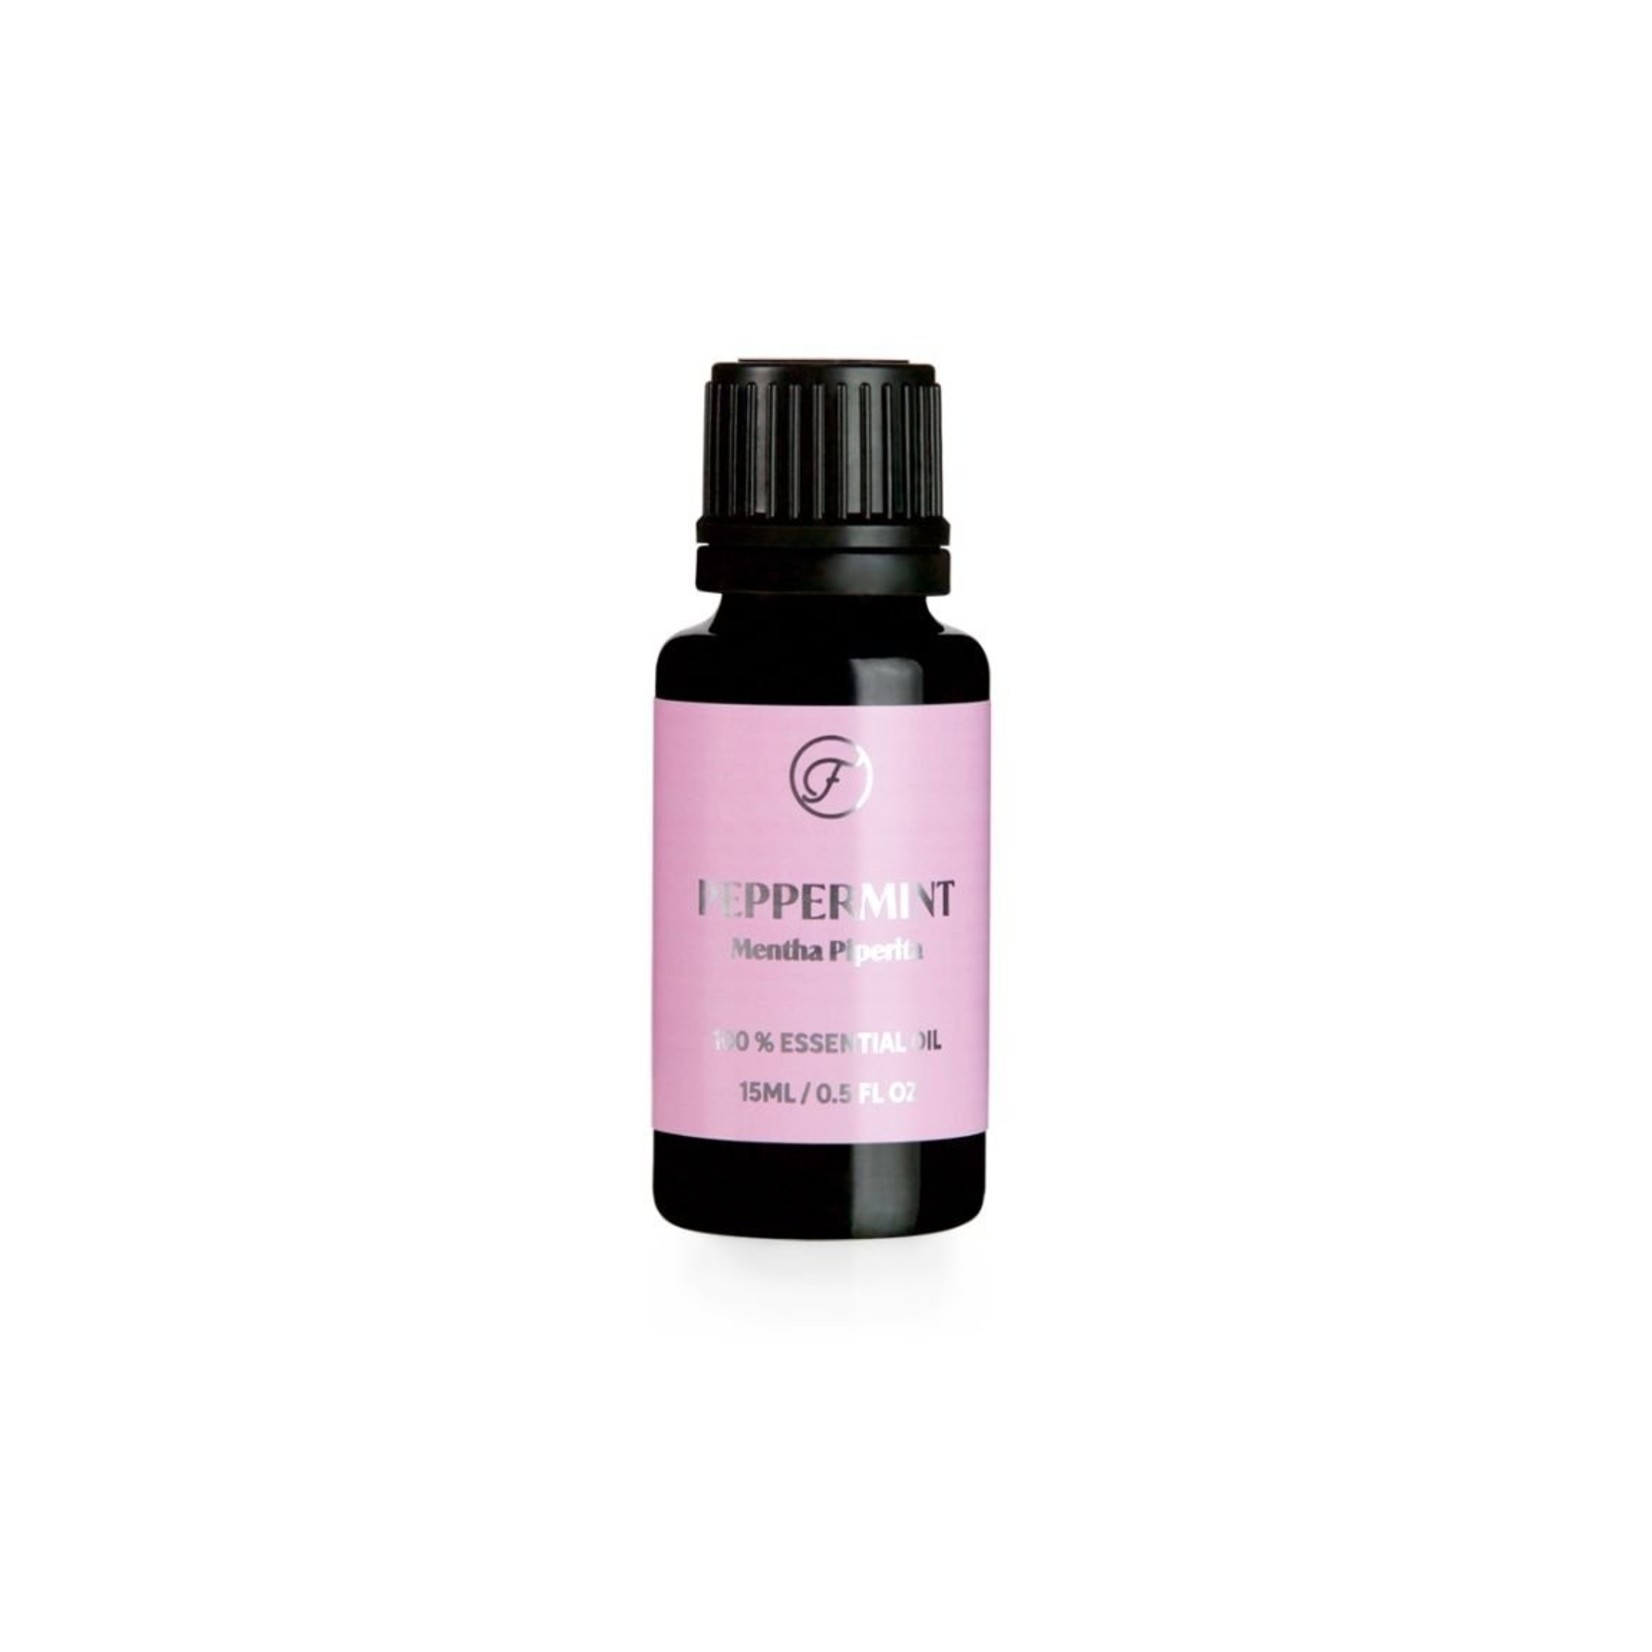 The Greenest Cosmetics 100% Pure Essential Oil - Peppermint